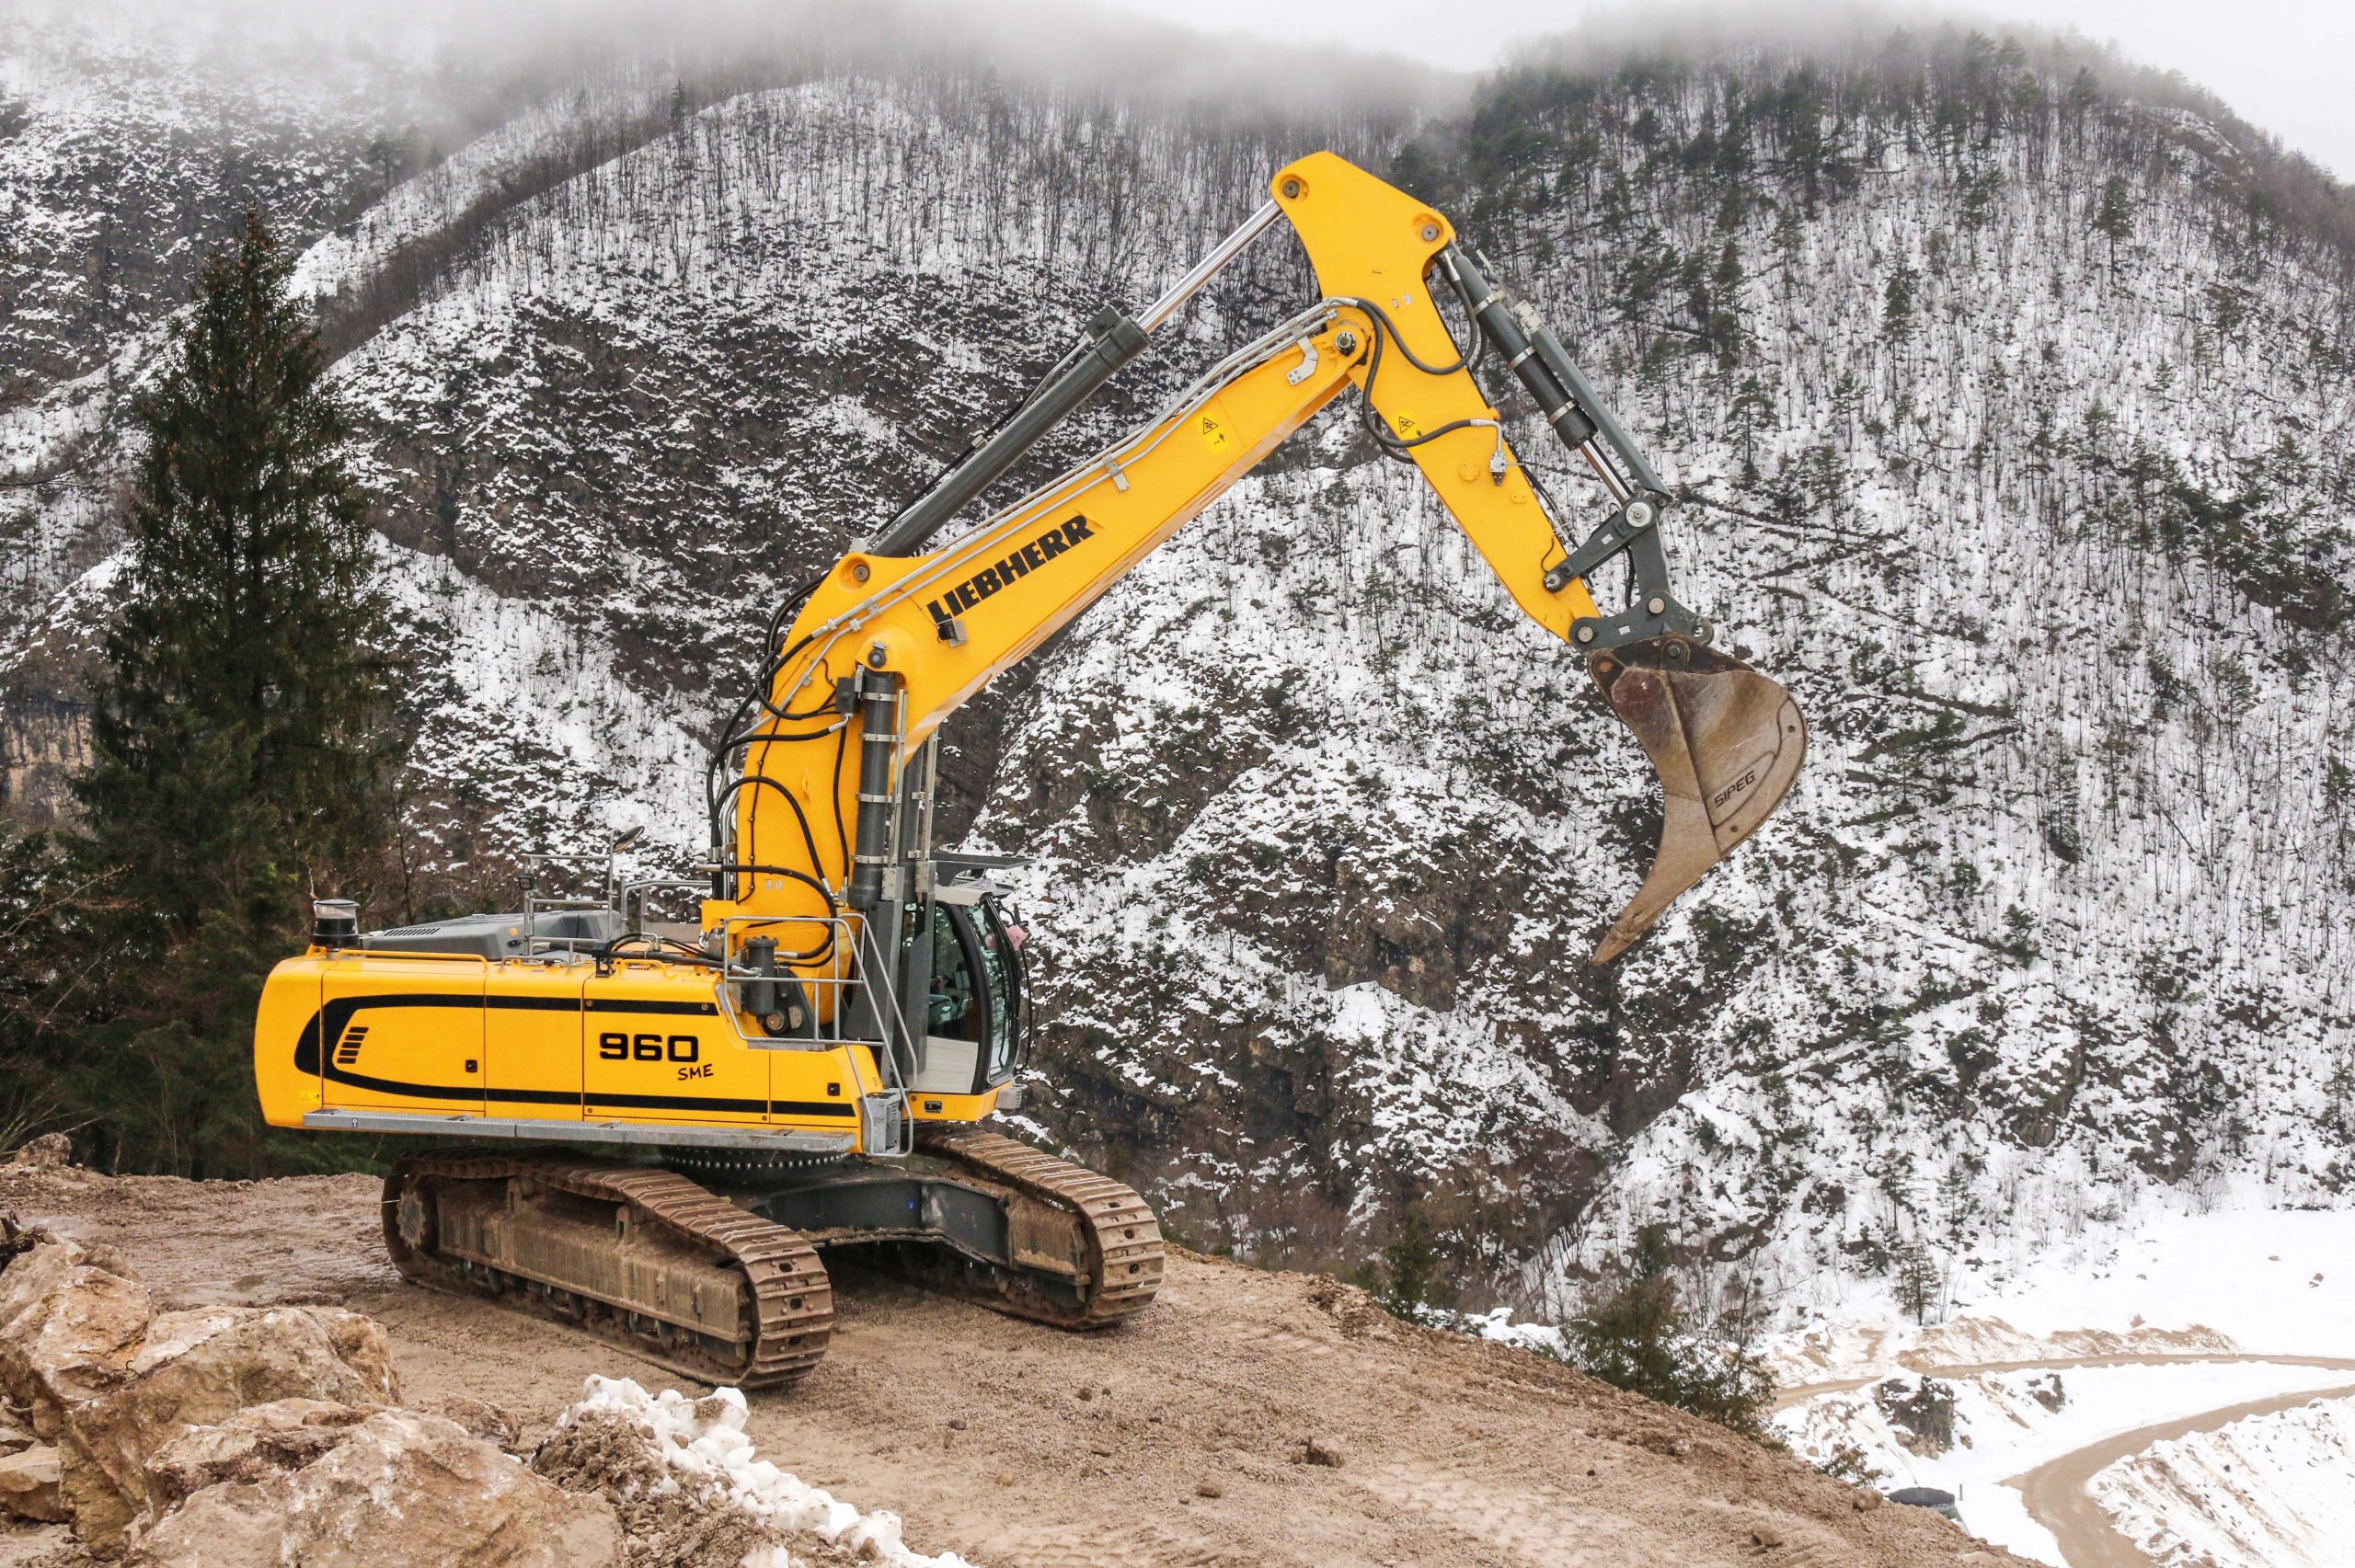 R 960 SME is the most powerful 60-tonne excavator